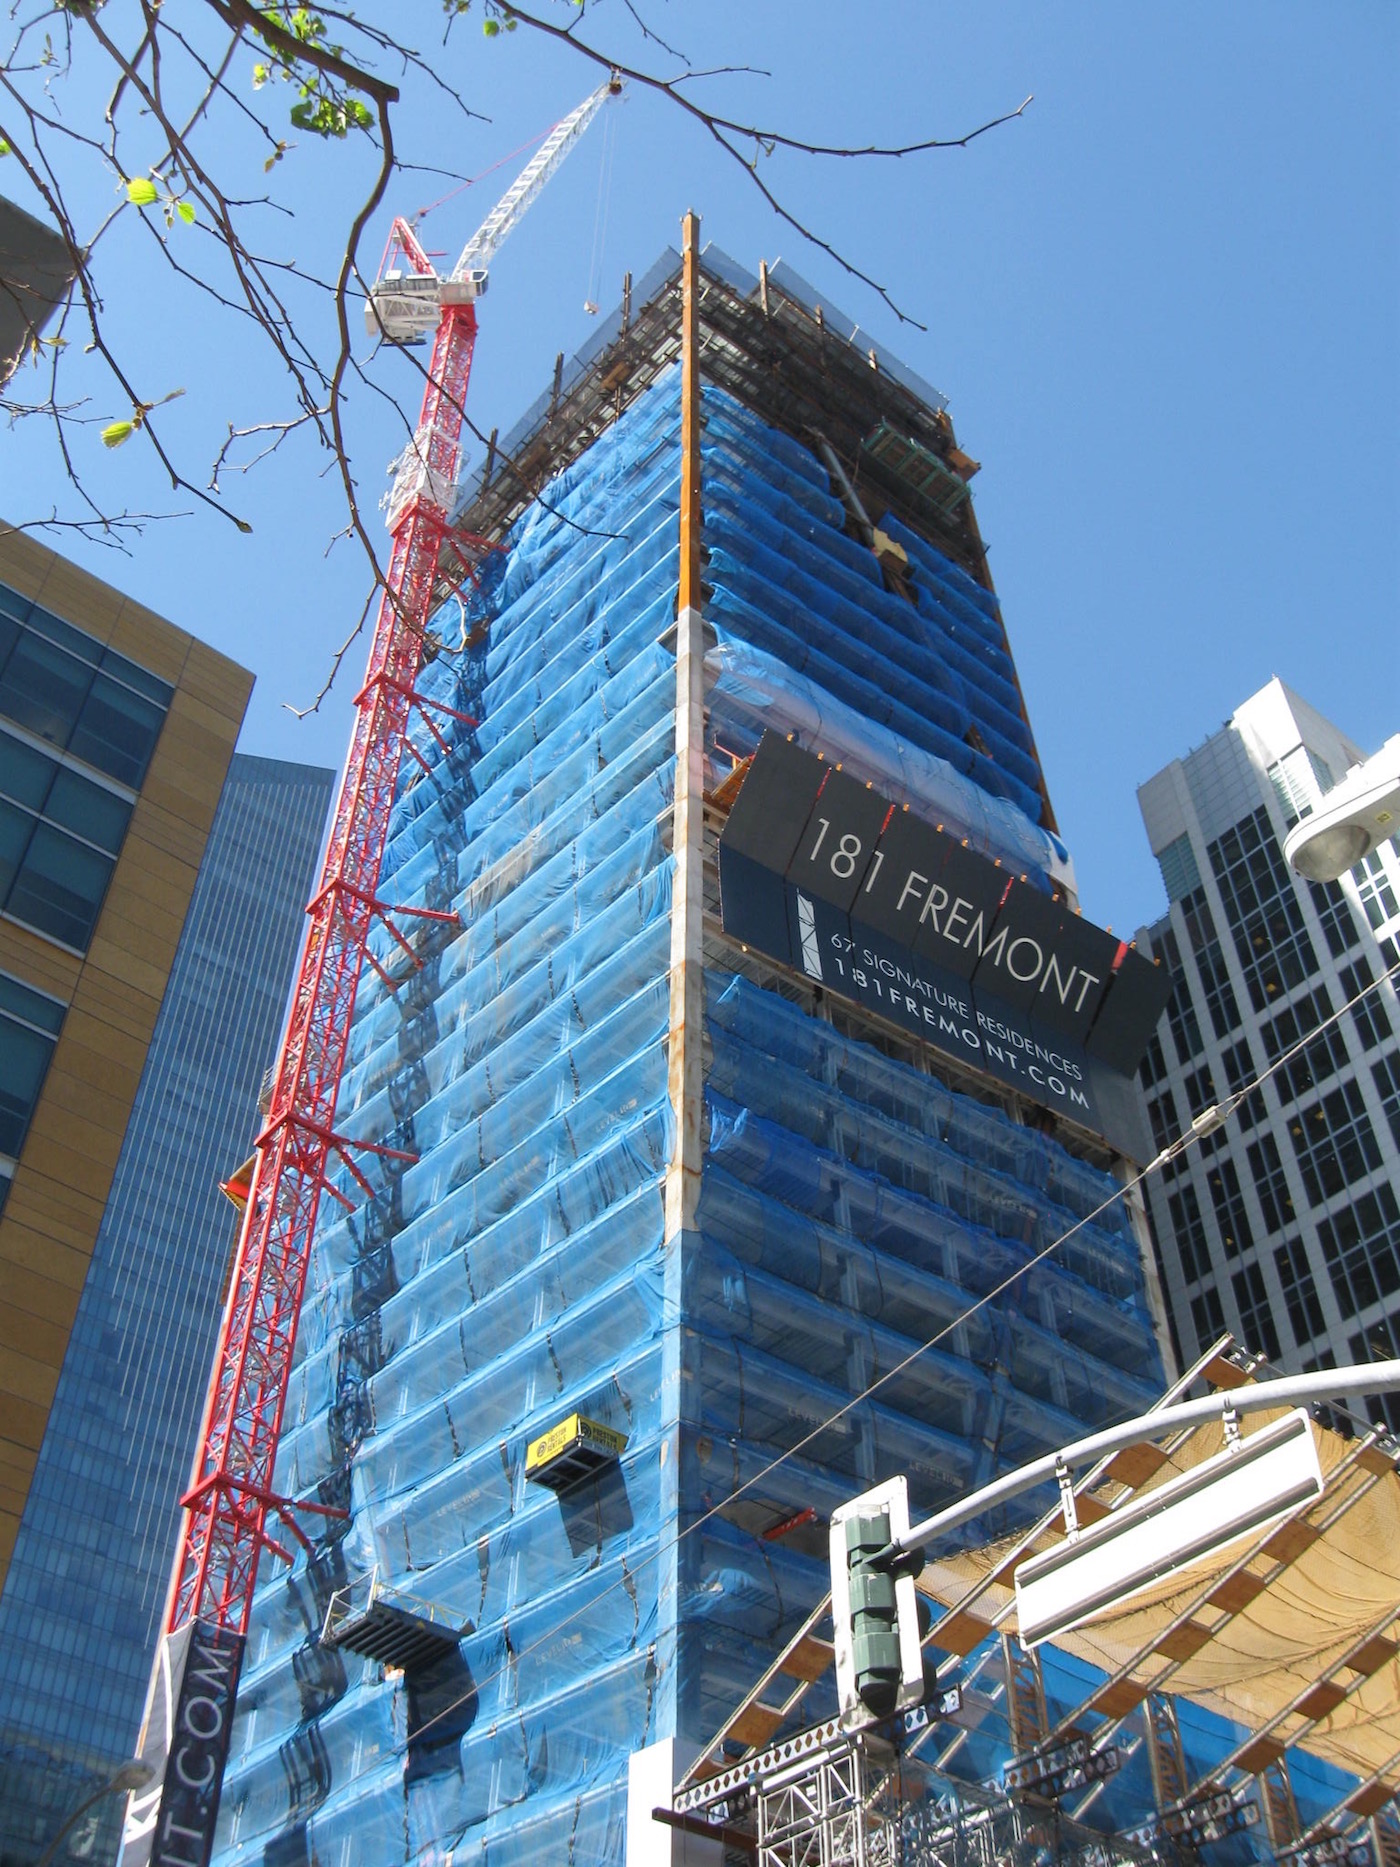 Level 10 Construction Announces Latest Benchmarks for 181 Fremont; Building Sets New Standards for Earthquake Resilence